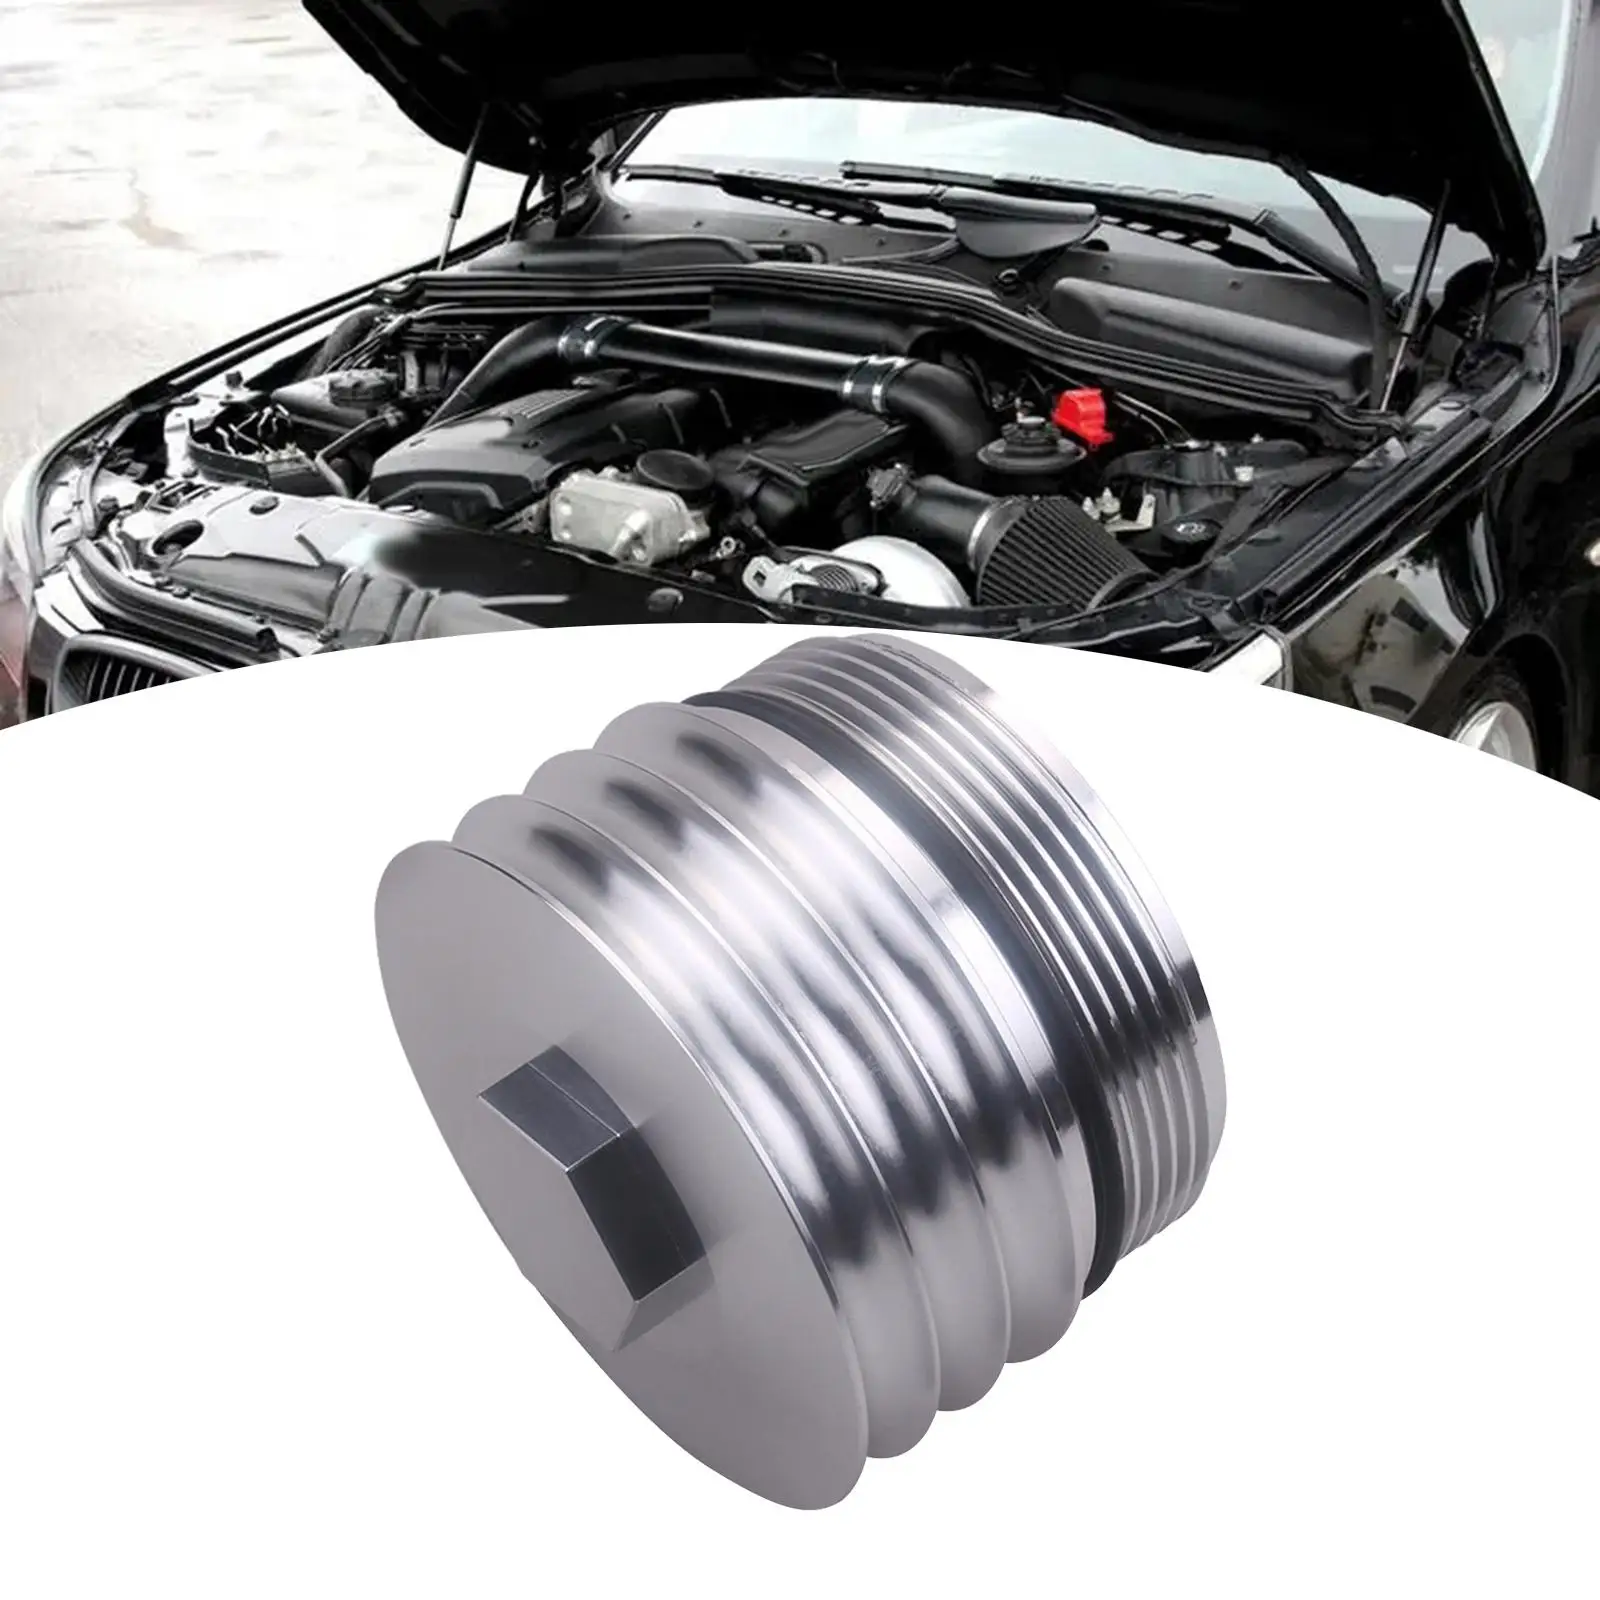 Oil Filter Cover Replacement Aluminum Alloy for BMW N54 F30 2.0T Engine